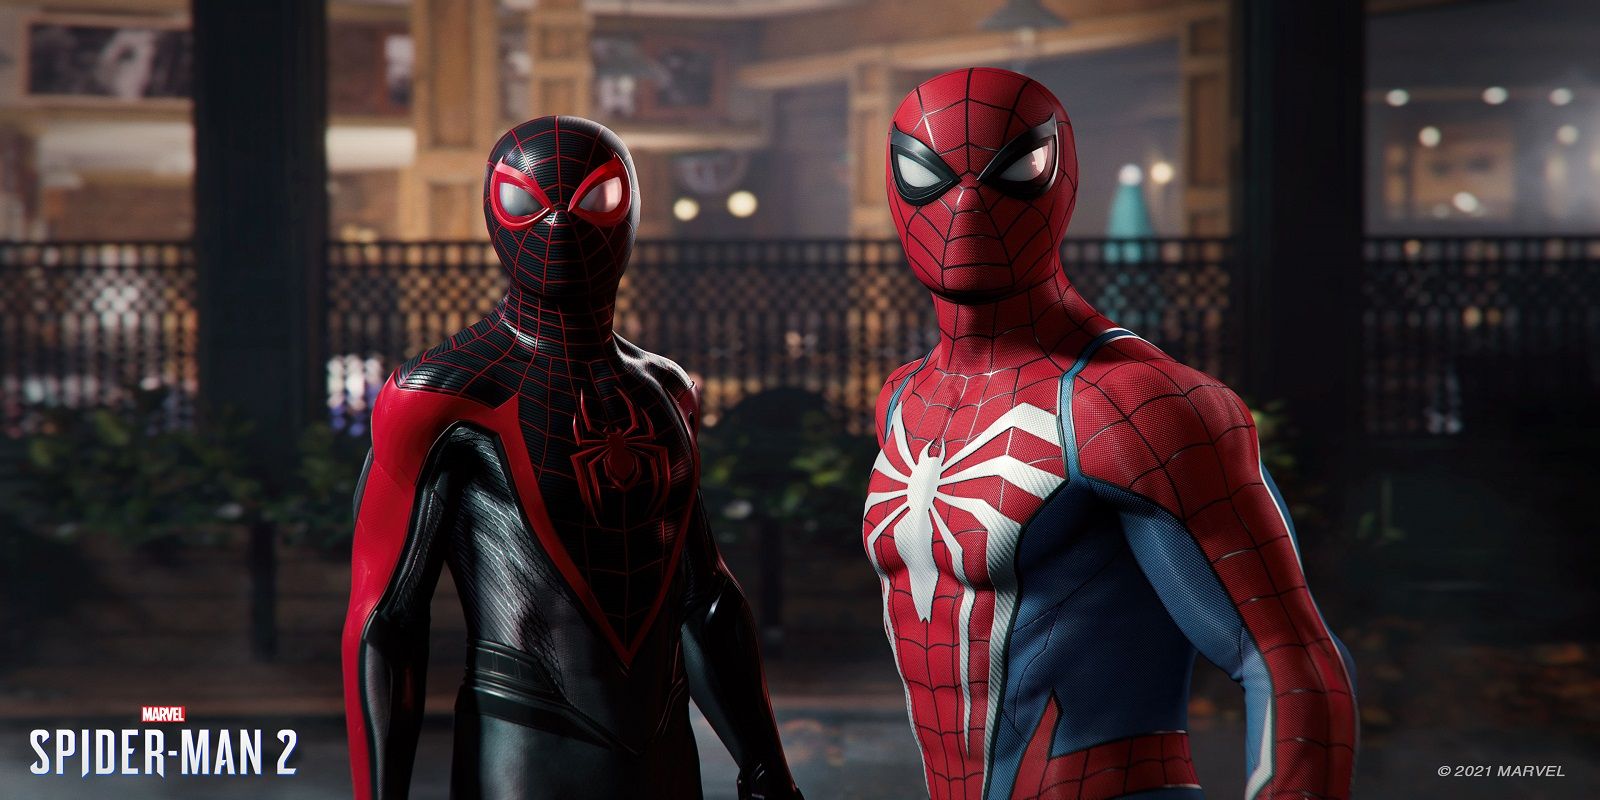 Spider-Man 2's DLC Should Focus on These Open-ended Plot Threads